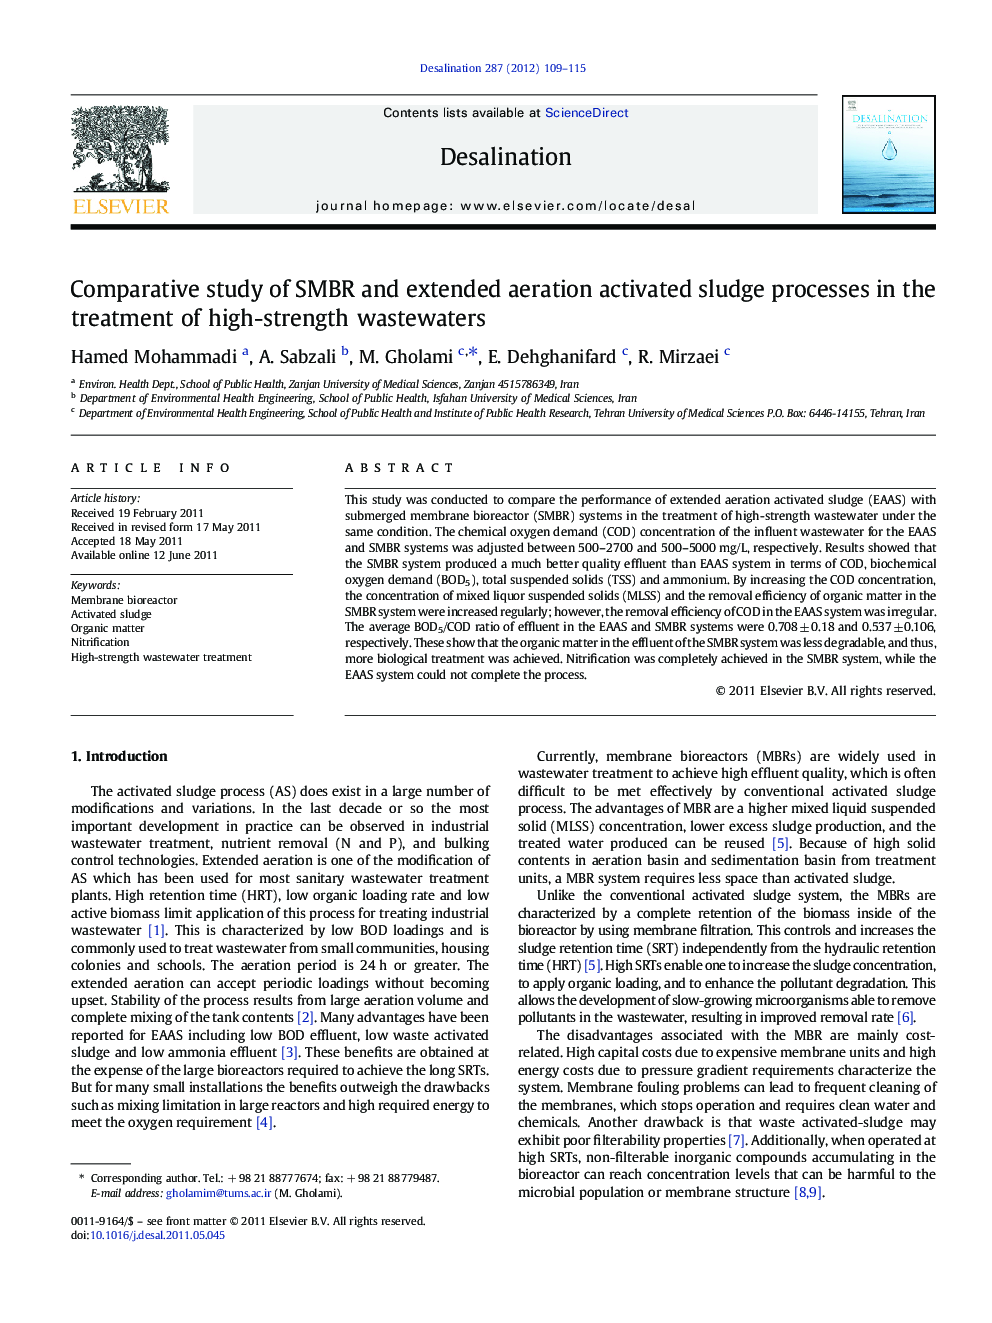 Comparative study of SMBR and extended aeration activated sludge processes in the treatment of high-strength wastewaters